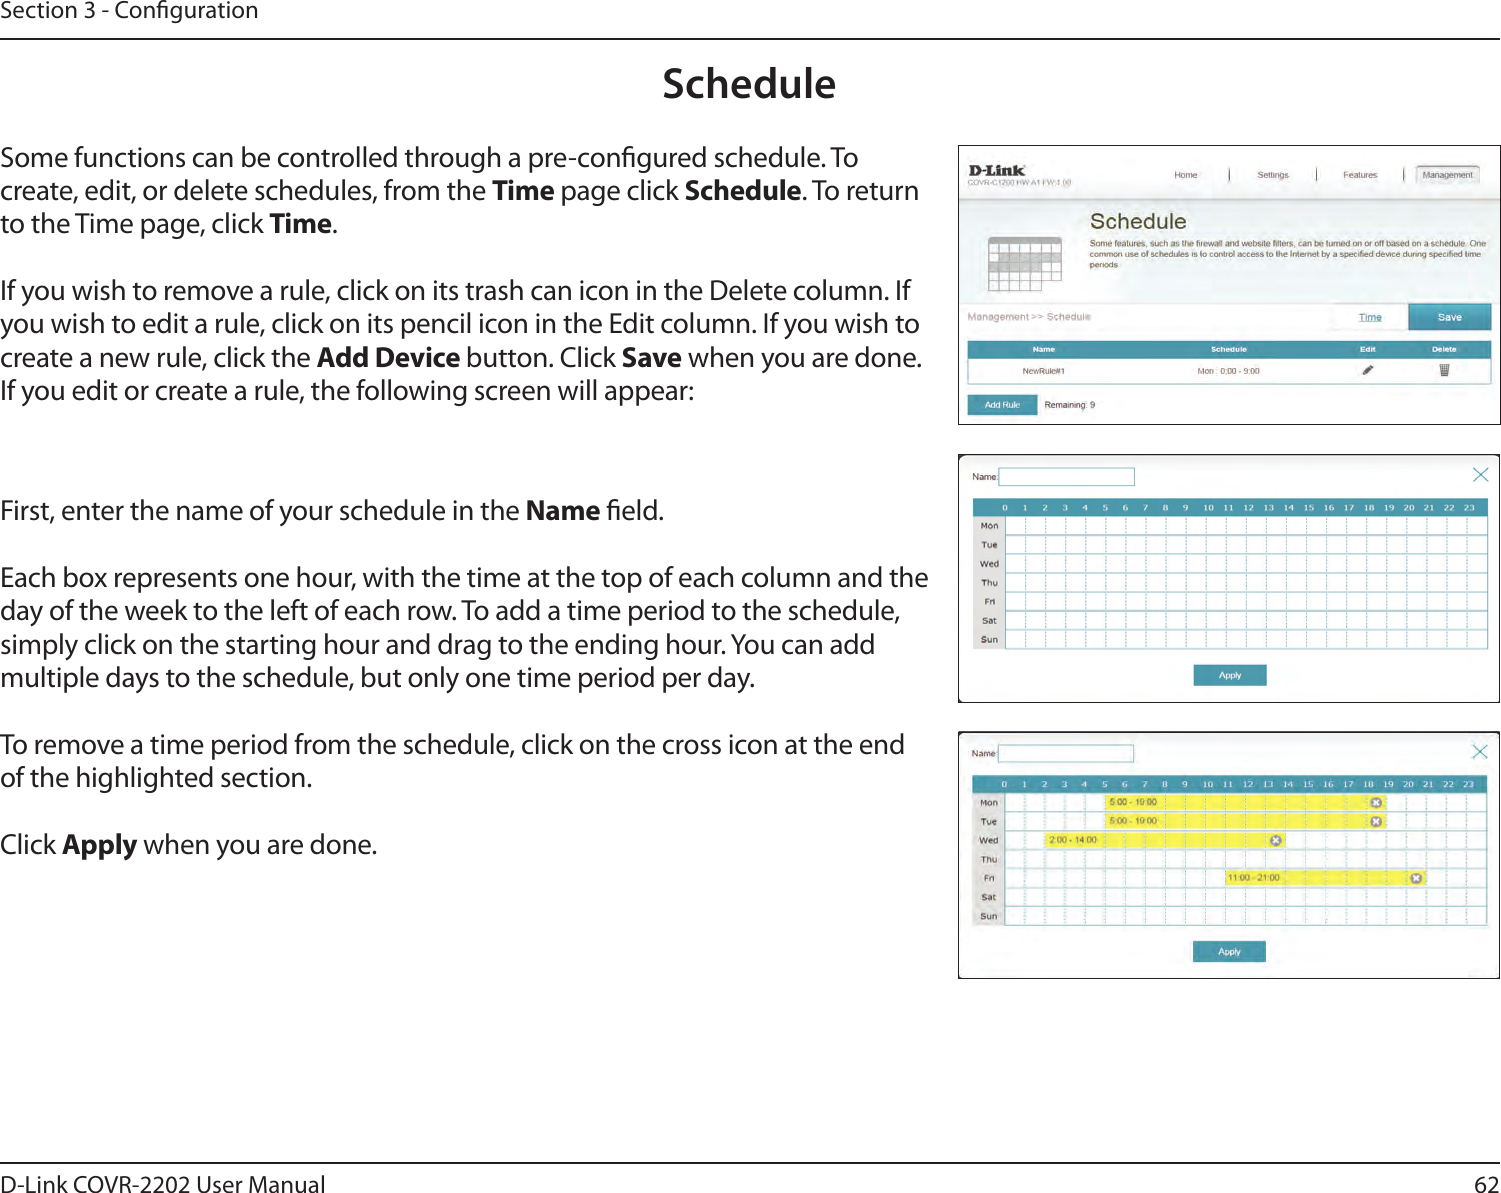 62D-Link COVR-2202 User ManualSection 3 - CongurationScheduleSome functions can be controlled through a pre-congured schedule. To create, edit, or delete schedules, from the Time page click Schedule. To return to the Time page, click Time. If you wish to remove a rule, click on its trash can icon in the Delete column. If you wish to edit a rule, click on its pencil icon in the Edit column. If you wish to create a new rule, click the Add Device button. Click Save when you are done. If you edit or create a rule, the following screen will appear:First, enter the name of your schedule in the Name eld.Each box represents one hour, with the time at the top of each column and the day of the week to the left of each row. To add a time period to the schedule, simply click on the starting hour and drag to the ending hour. You can add multiple days to the schedule, but only one time period per day.To remove a time period from the schedule, click on the cross icon at the end of the highlighted section.Click Apply when you are done.